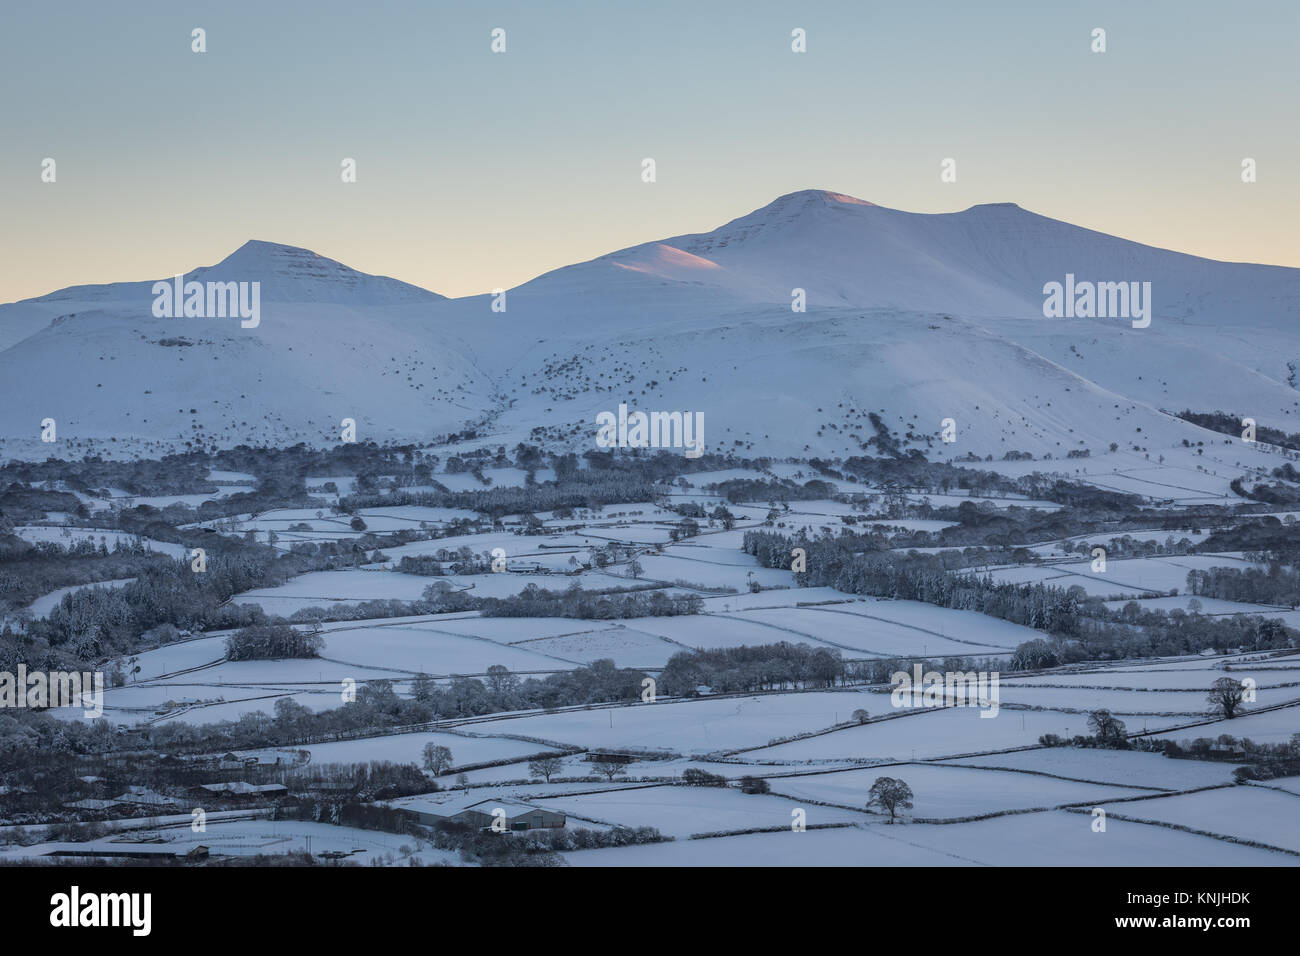 Paxton's Tower. UK. 11th December, 2017. Looking across a snow covered landsape at sunset, towards Pen y Fan mountain from Pen y Crug hill fort. Brecon Beacons National Park, Wales. Credit: Drew Buckley/Alamy Live News Stock Photo